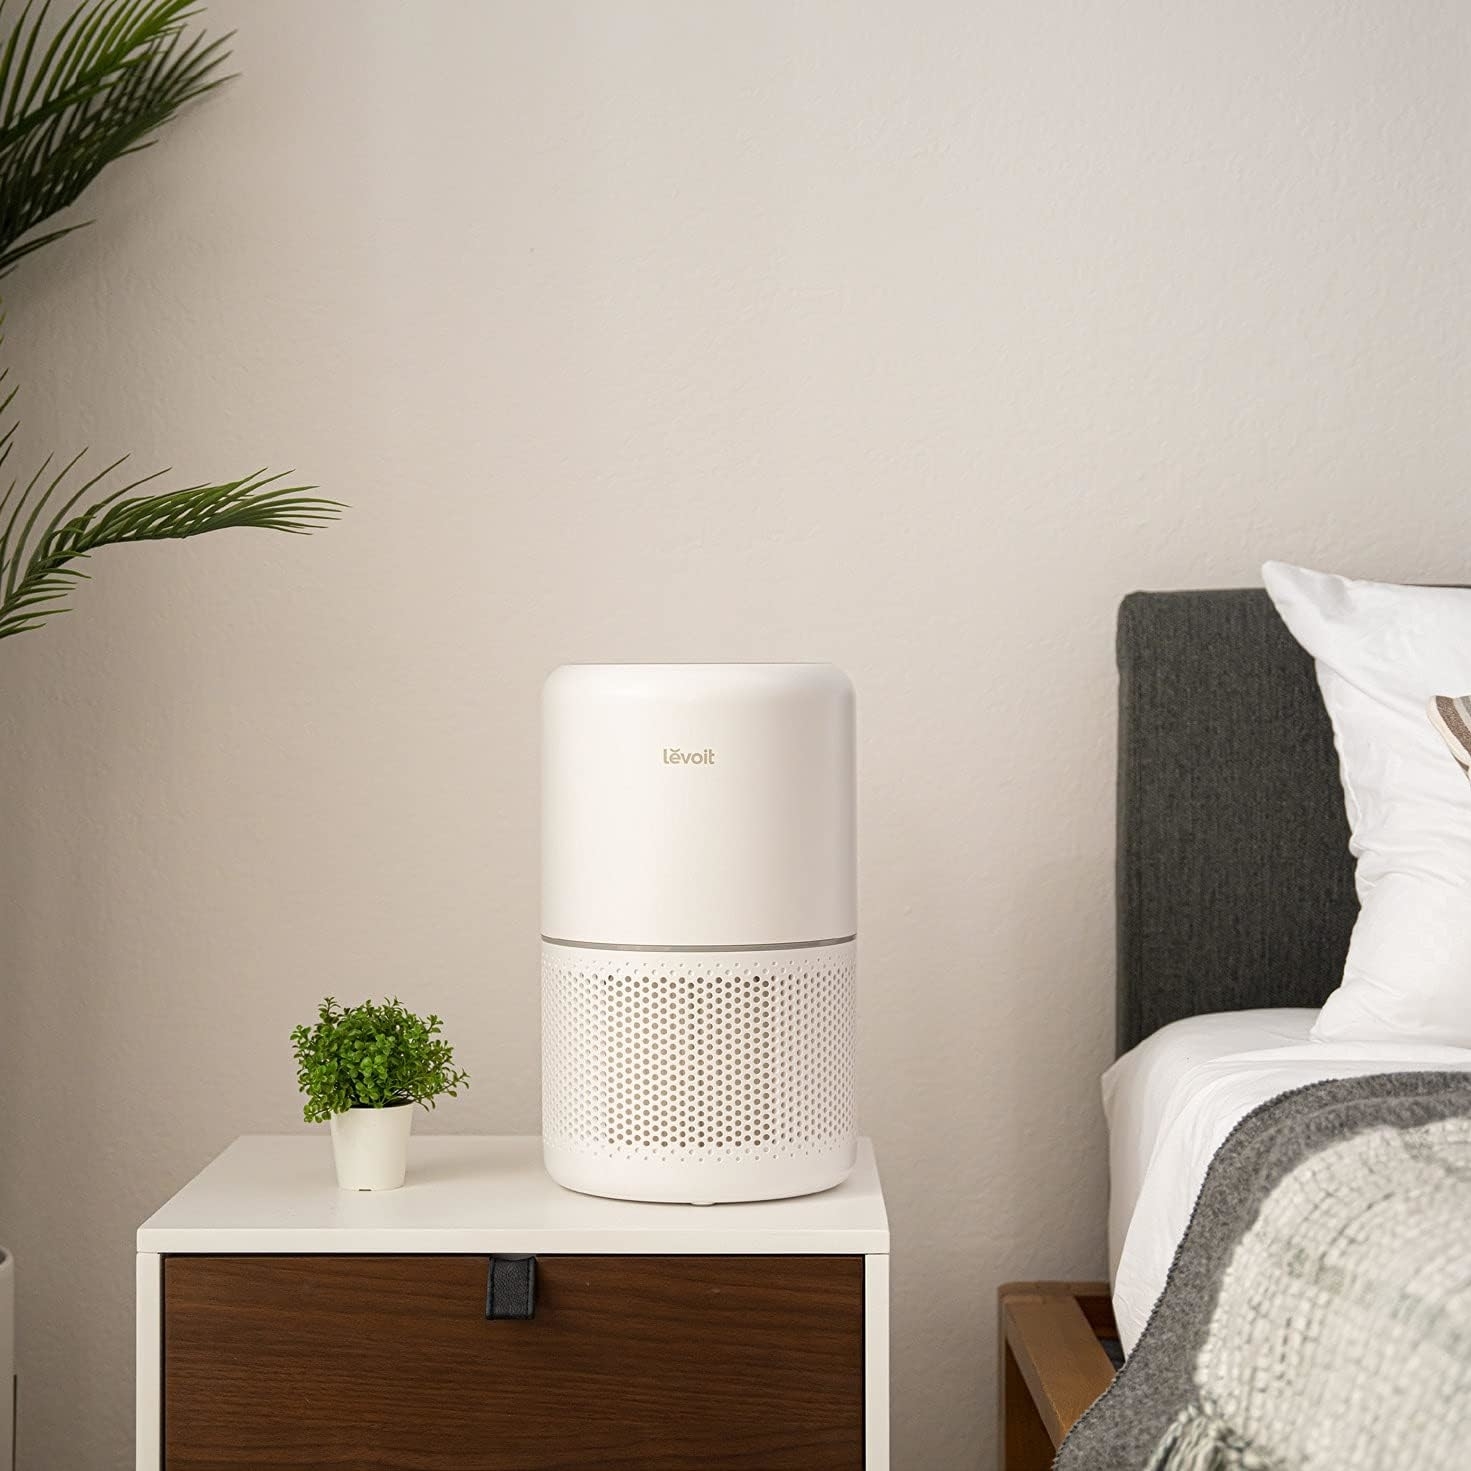 the levoit air purifier on a night stand